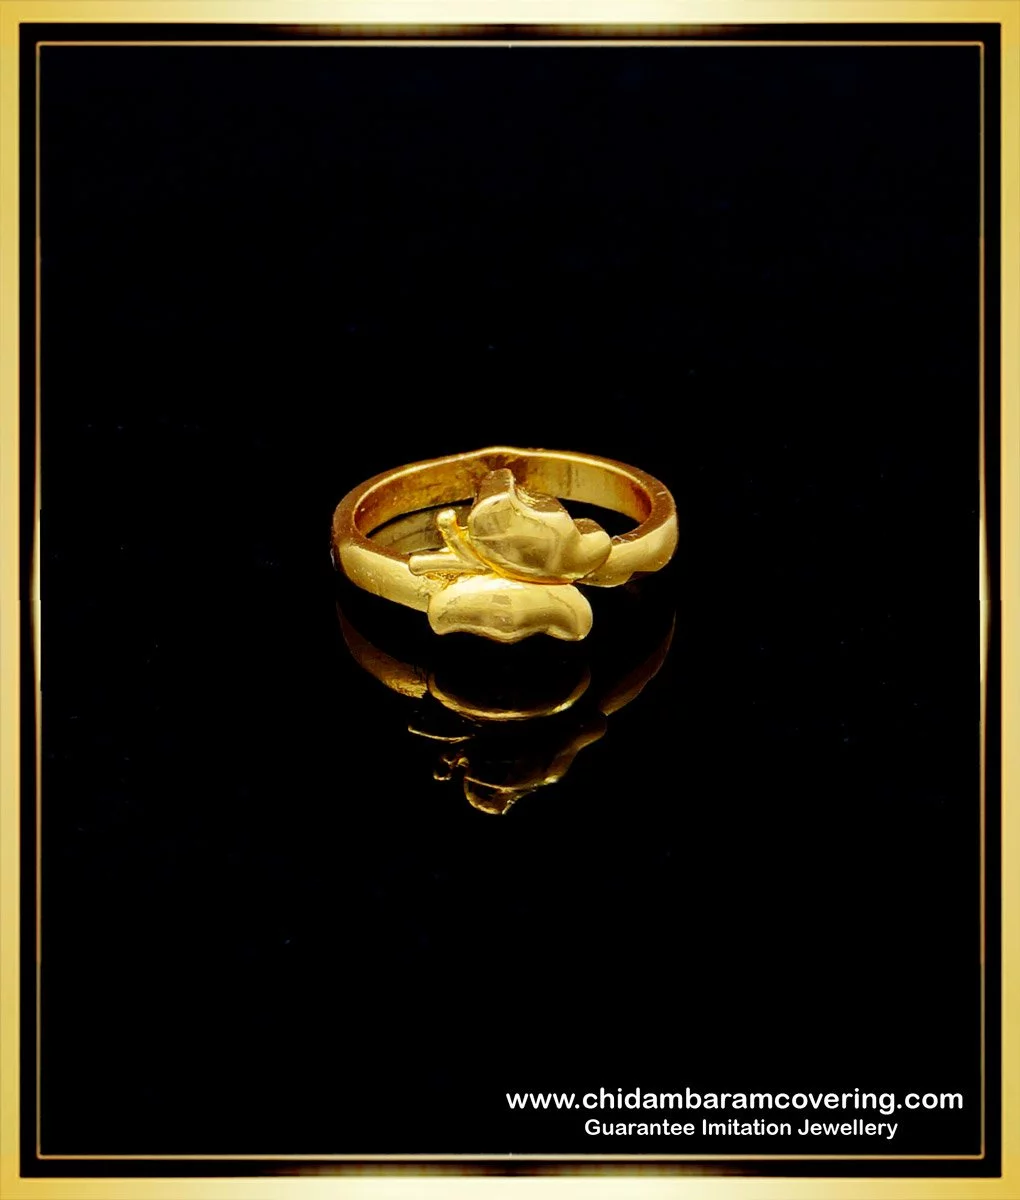 Amazon.com: Small heart ring in 14k rose gold, heart nice ring, heart form  ring, gift for her, ring in solid gold, delicate ring (yellow-gold, 11.25)  : Handmade Products